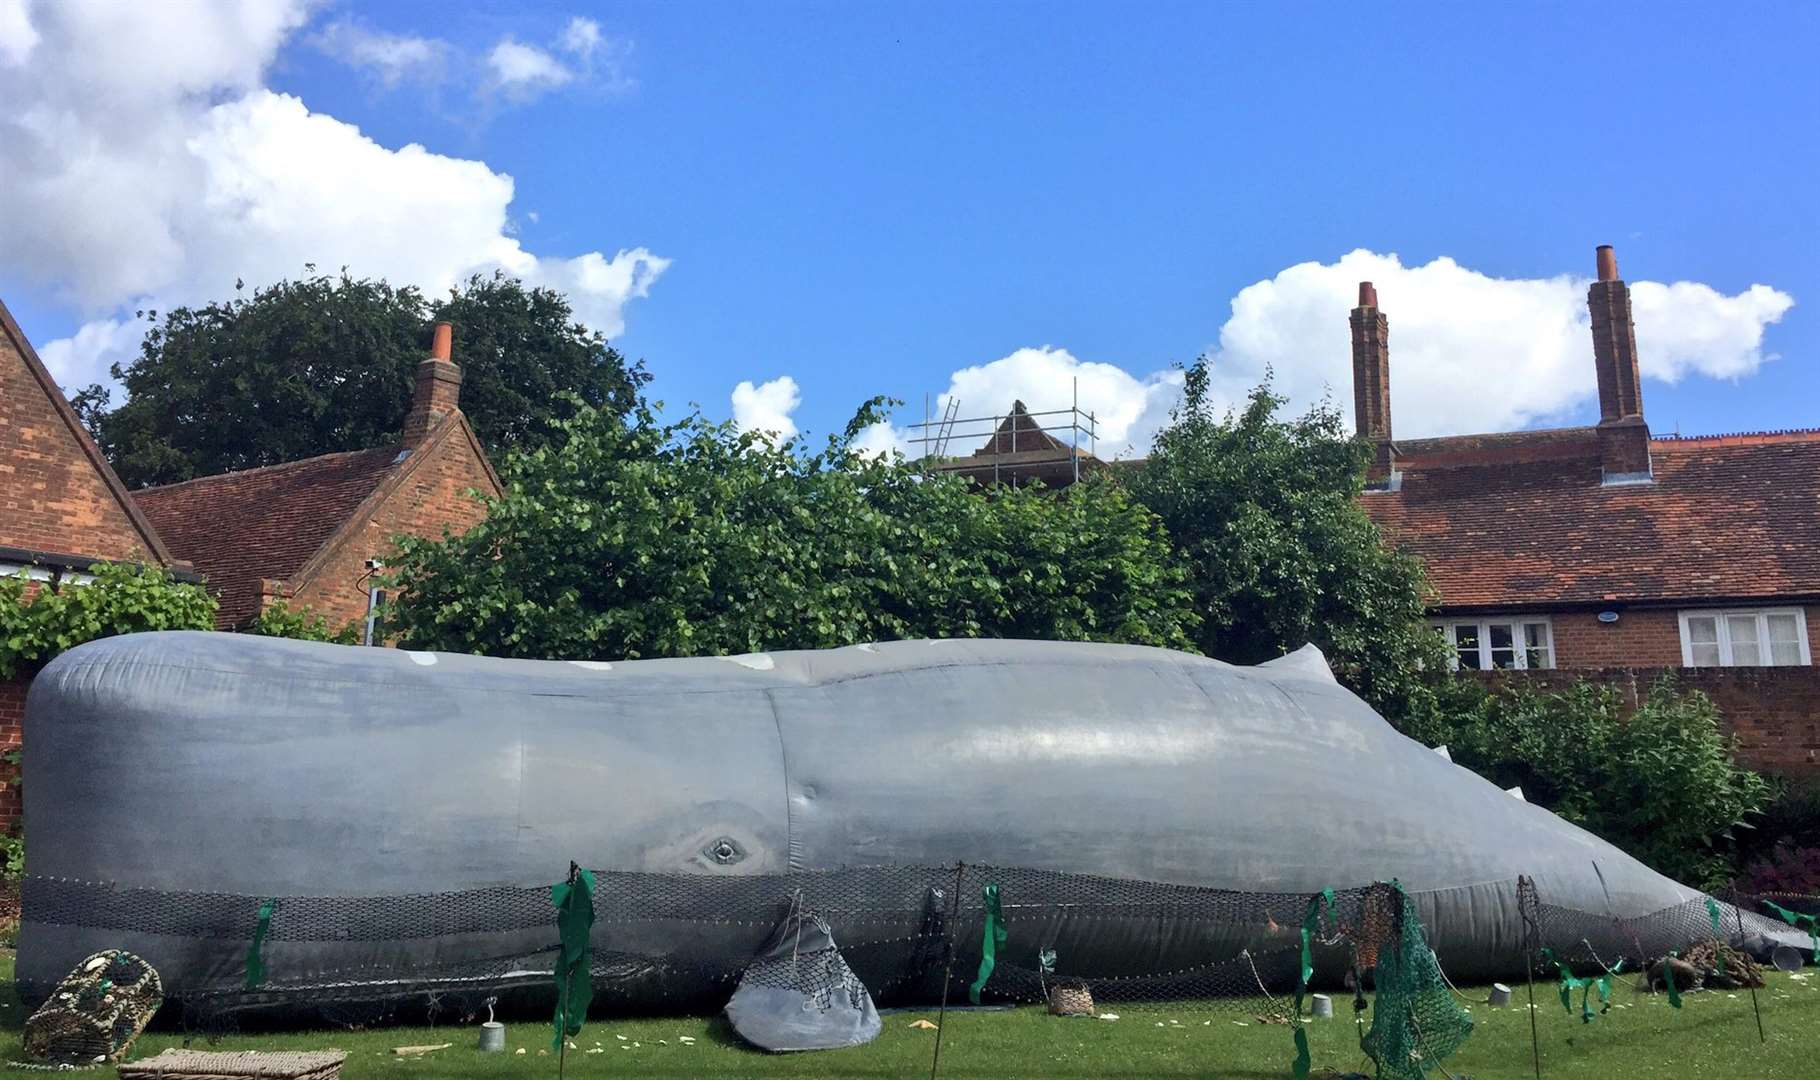 The Inflatable Whale Show will come to Dreamland (1269397)